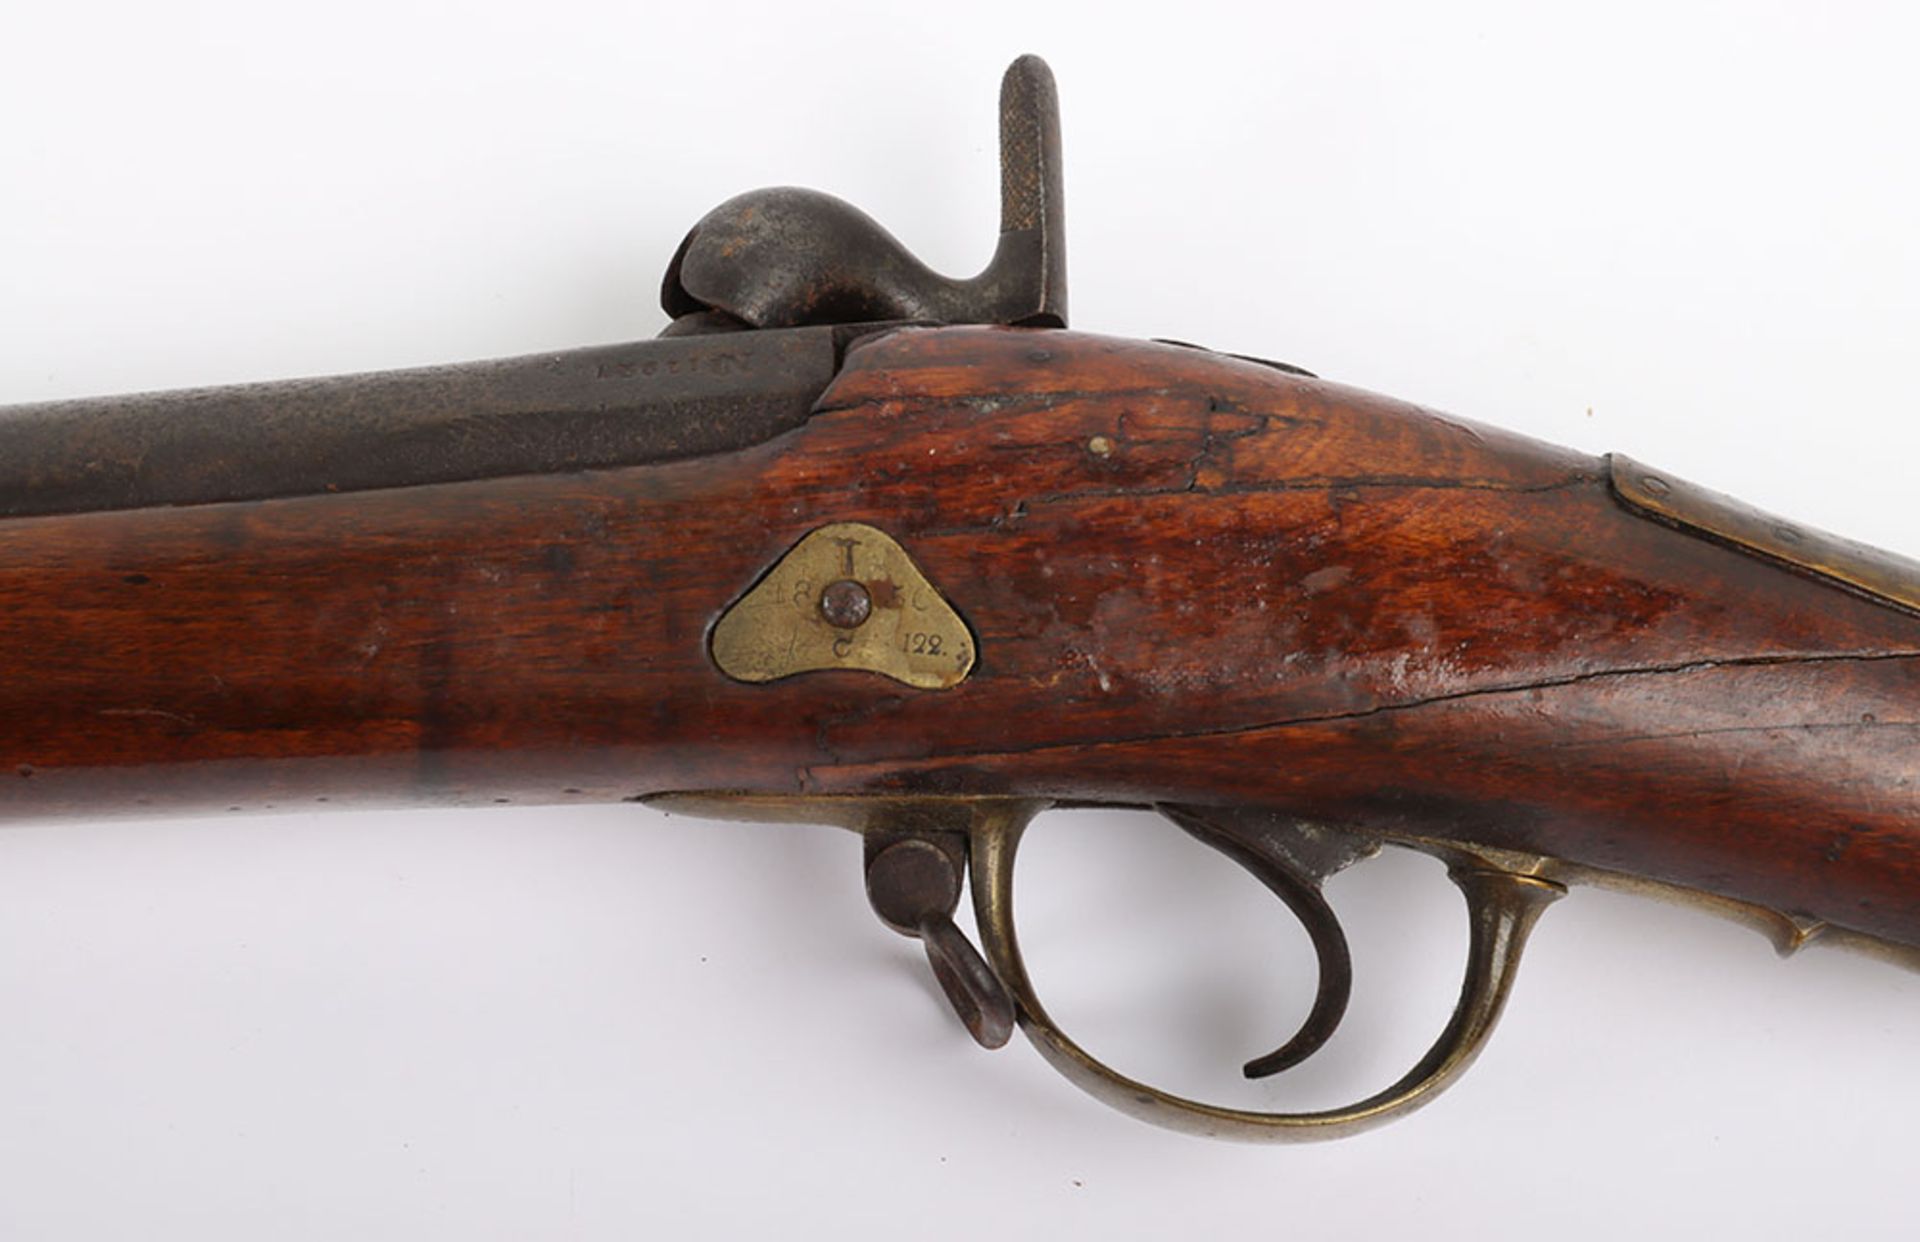 14-Bore Russian Back Action Military Musket - Image 13 of 17